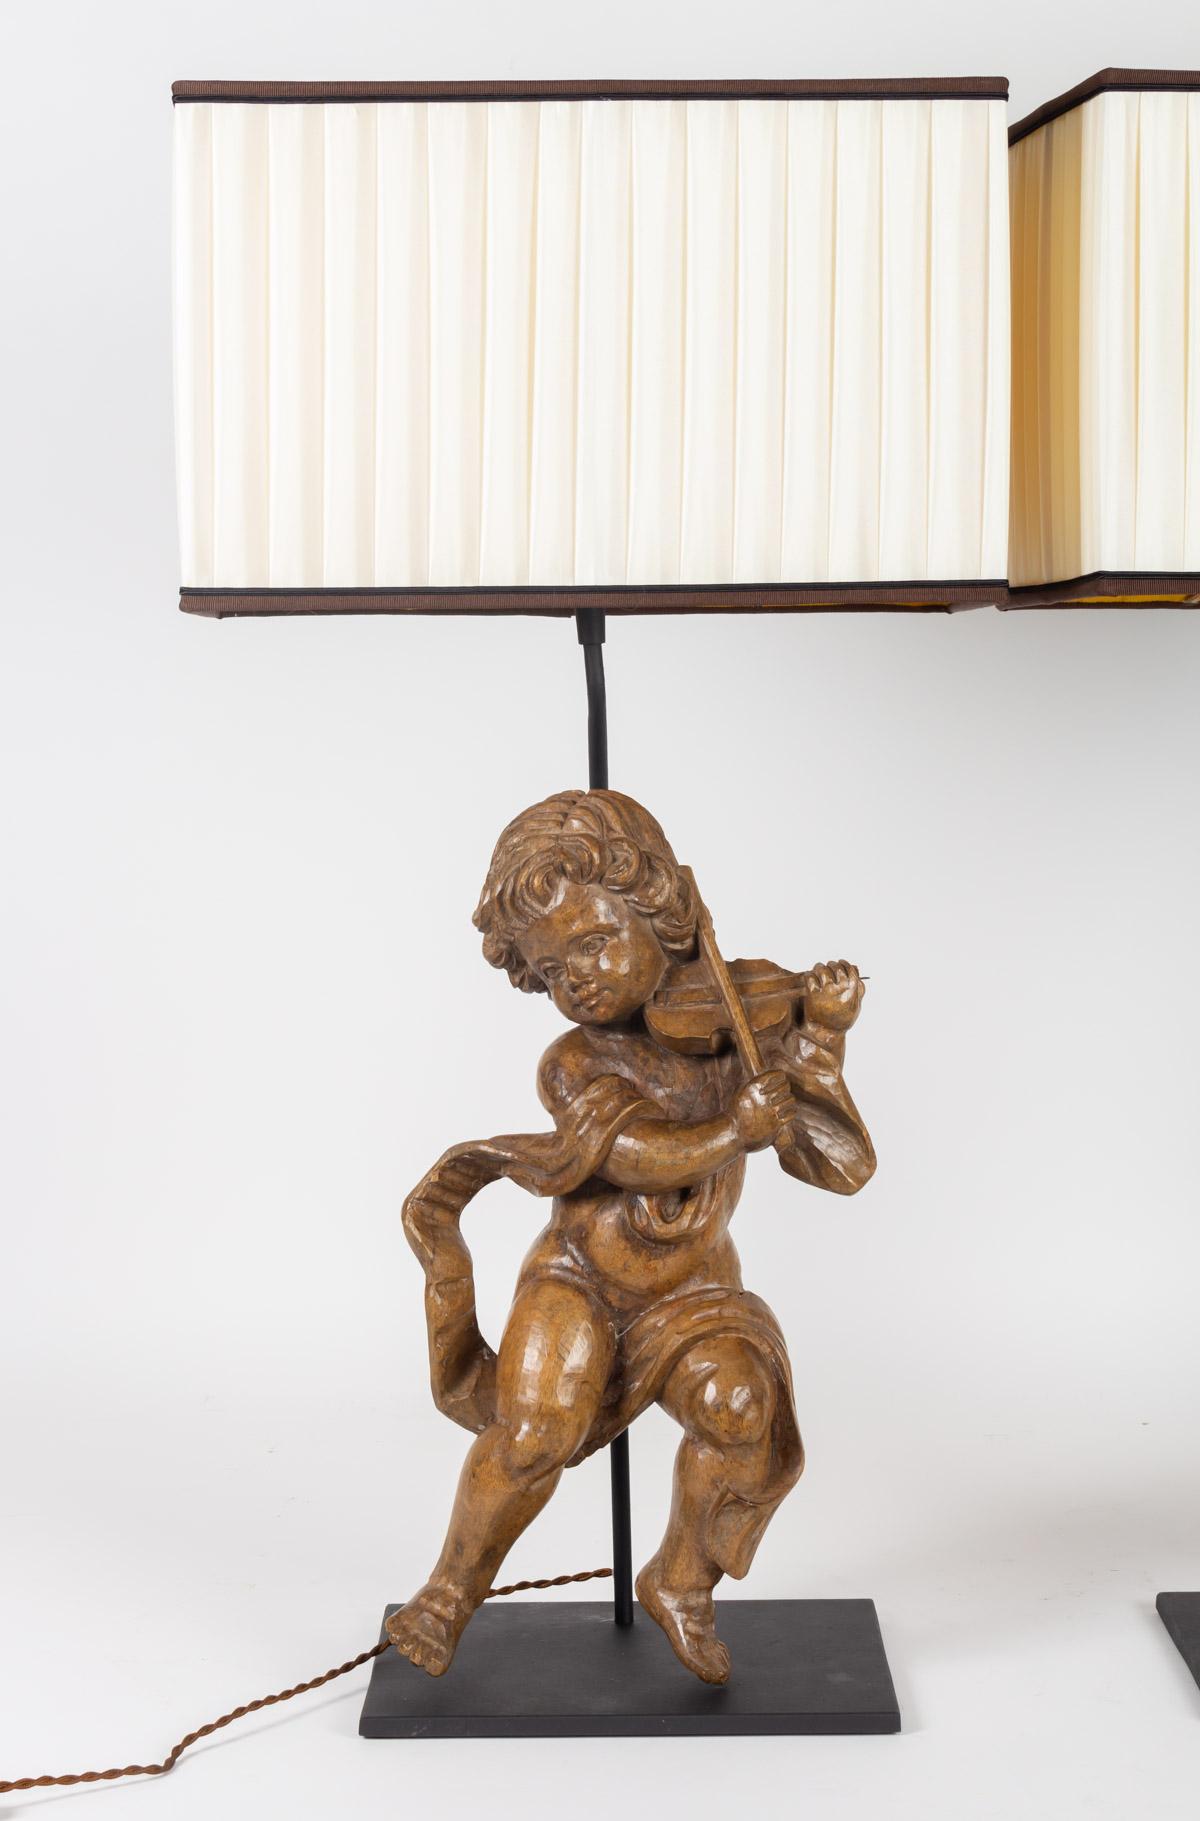 Pair of 18th century carved wooden lovers mounted in an important lamp
Measures: H 81cm, W 40cm, D 20cm.